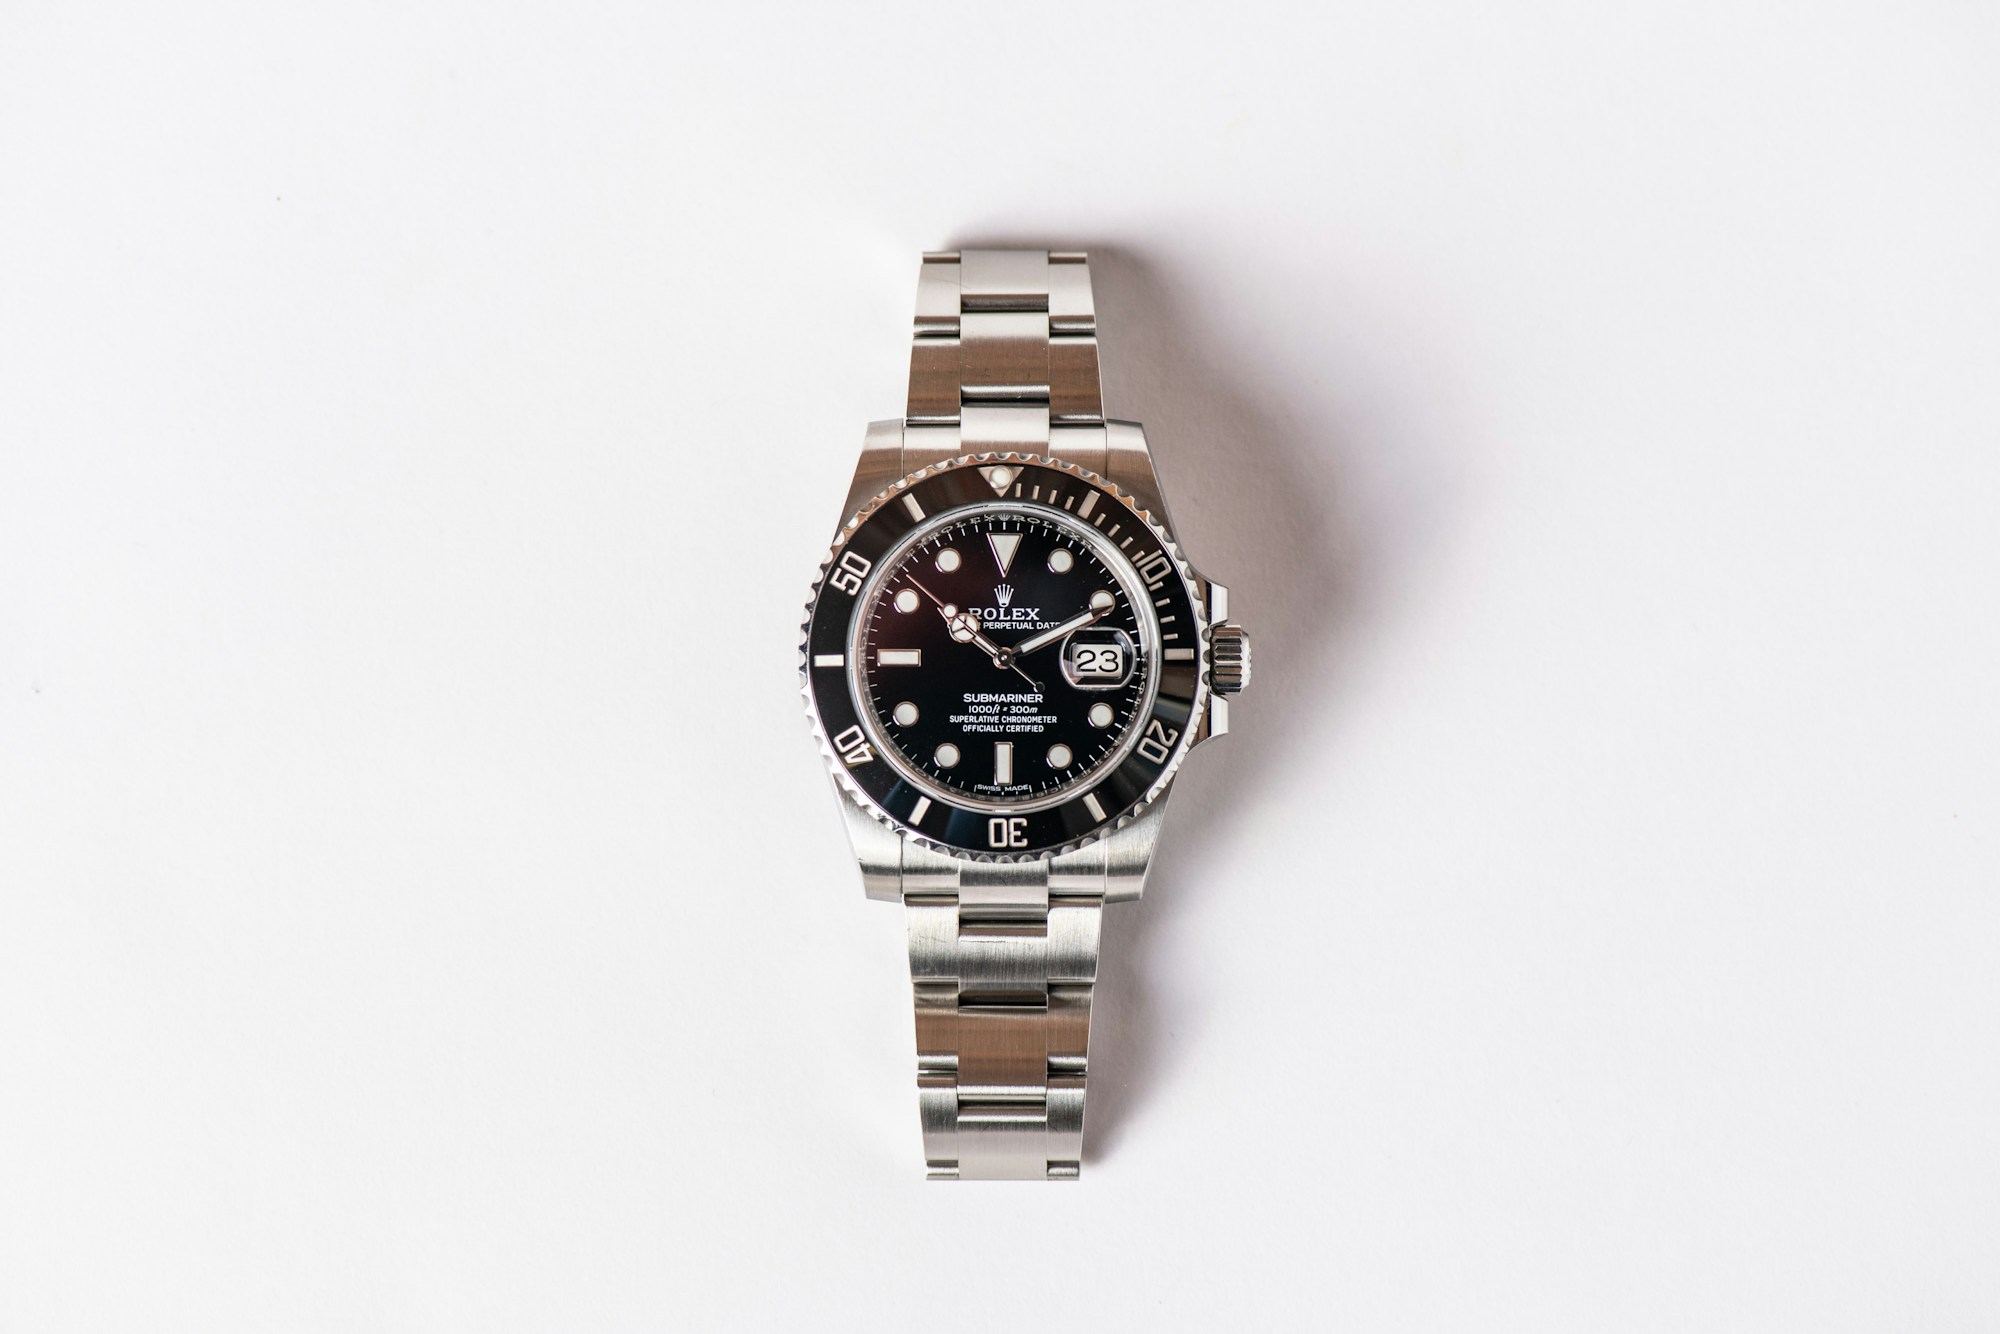 ROLEX SUBMARINER DATE for in Chester, Cheshire, United Kingdom